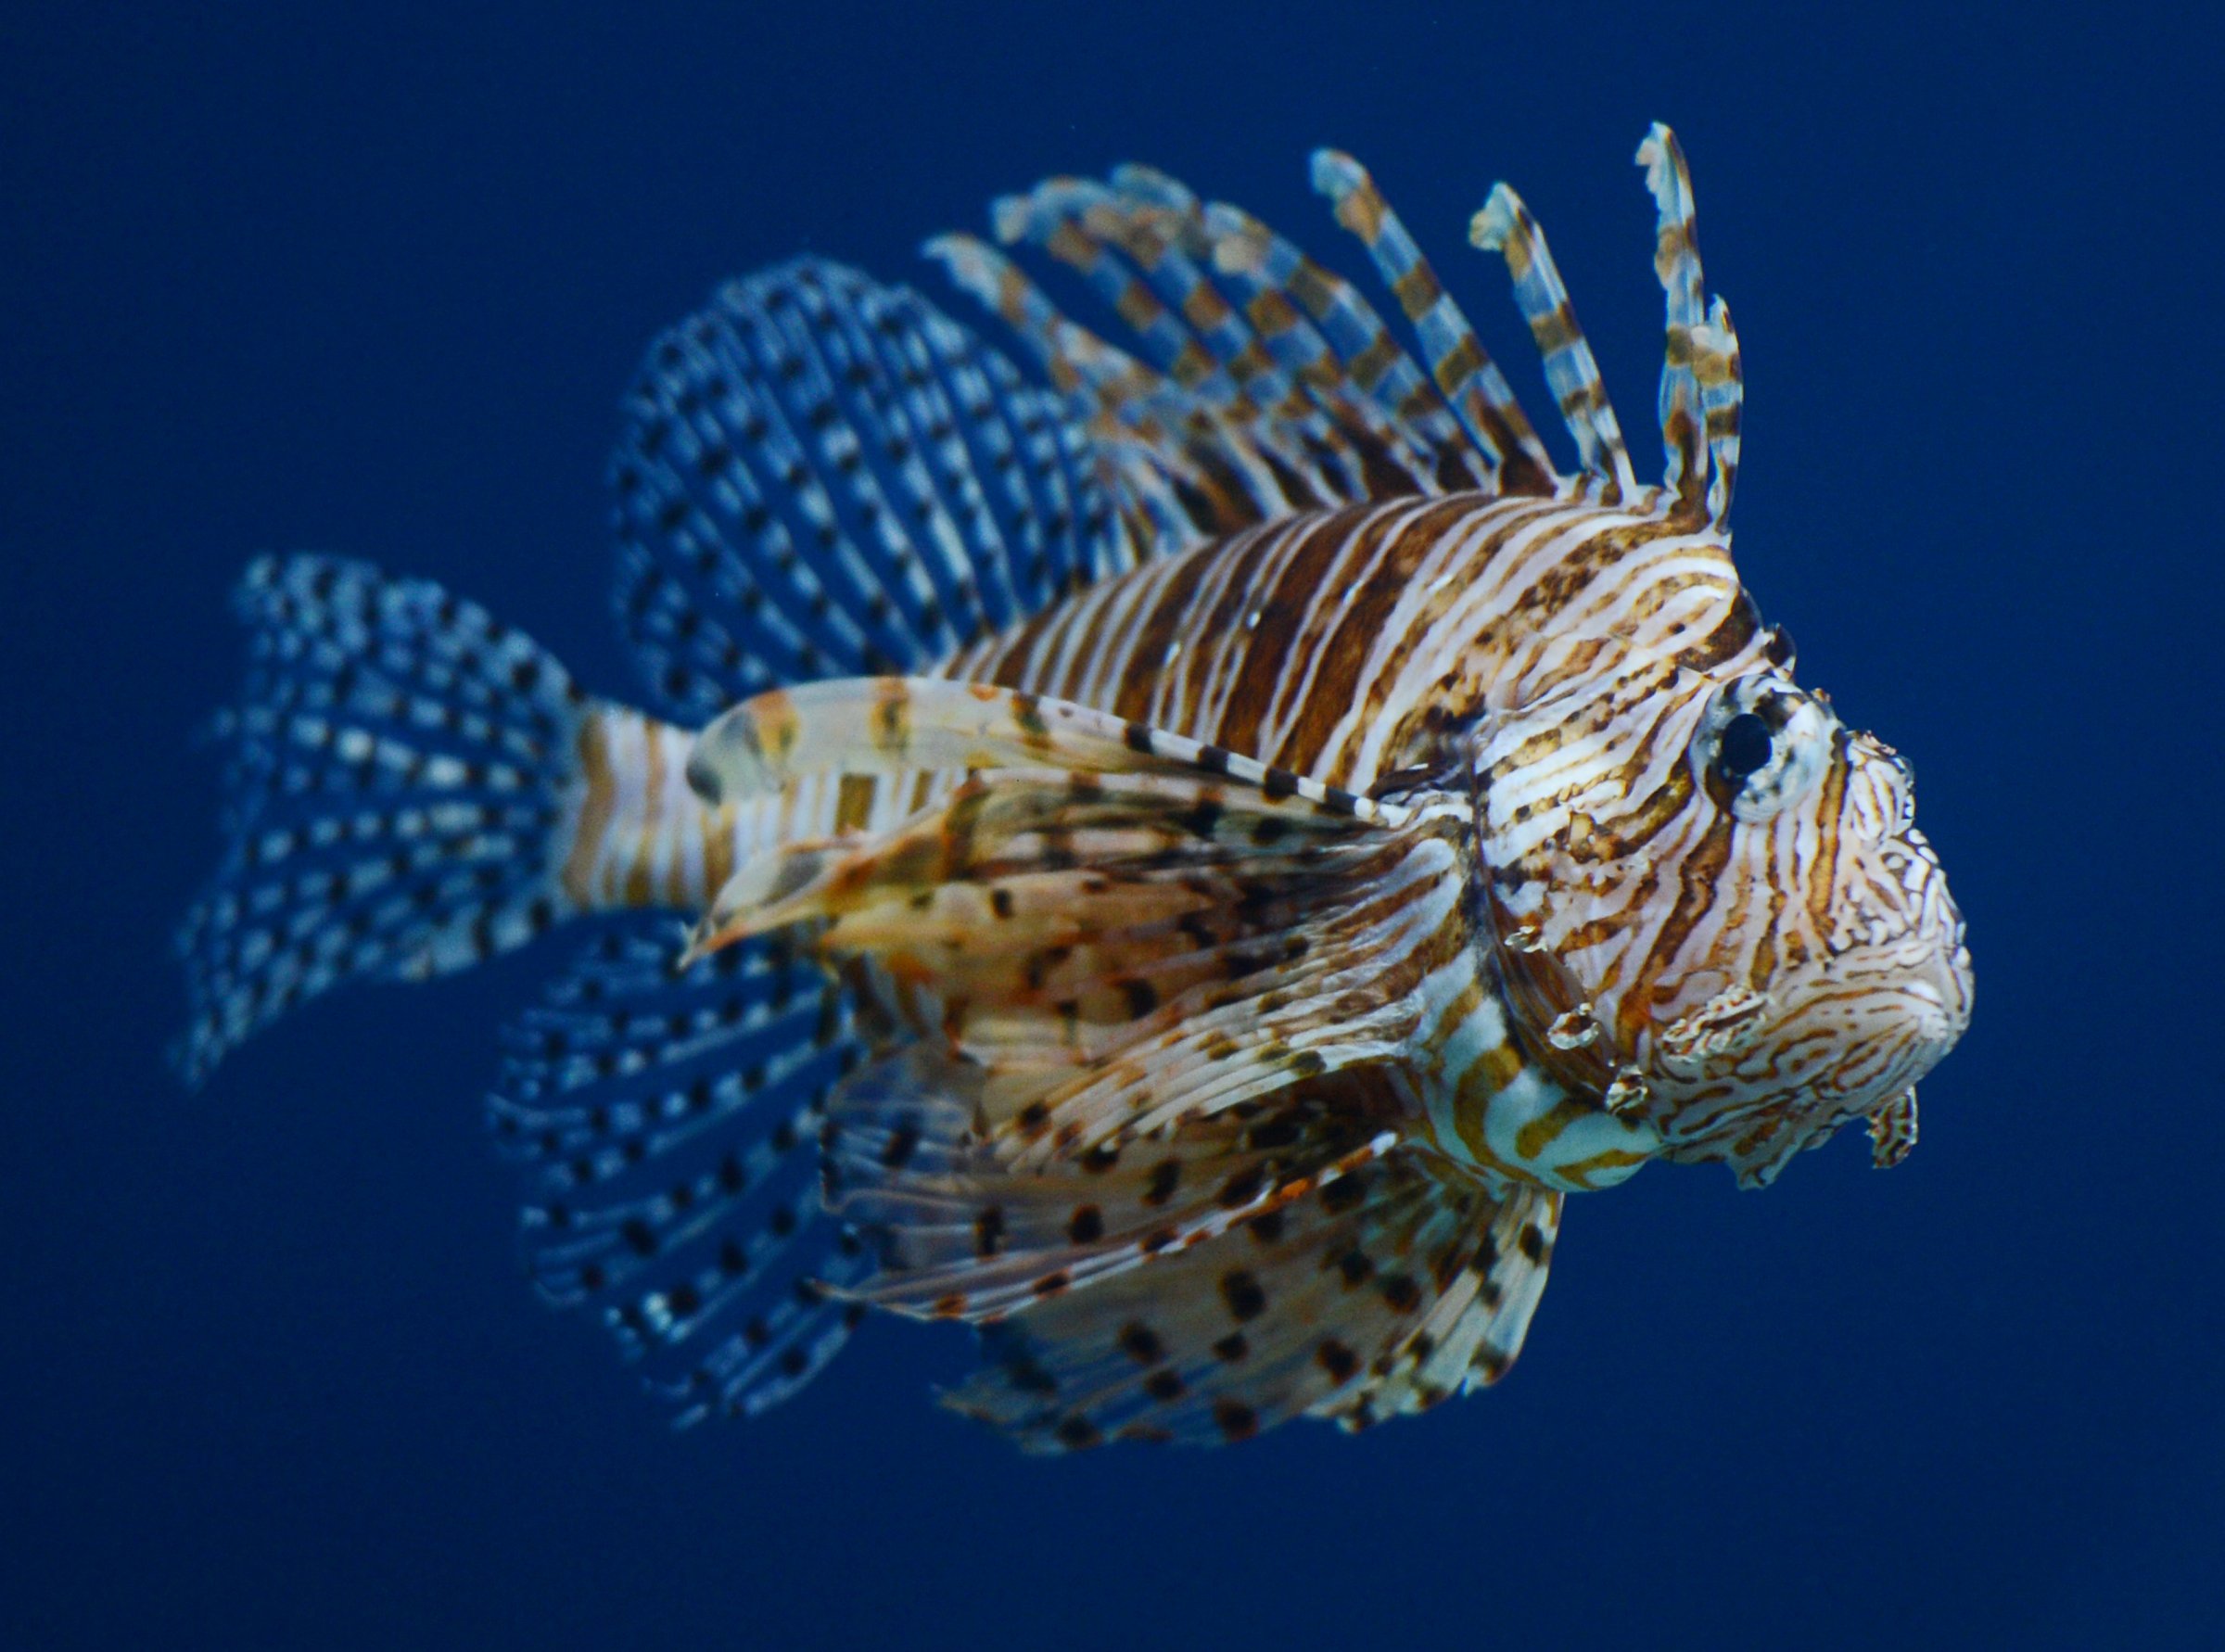 A winged lionfish at the Beijing Aquarium on May 30, 2012.